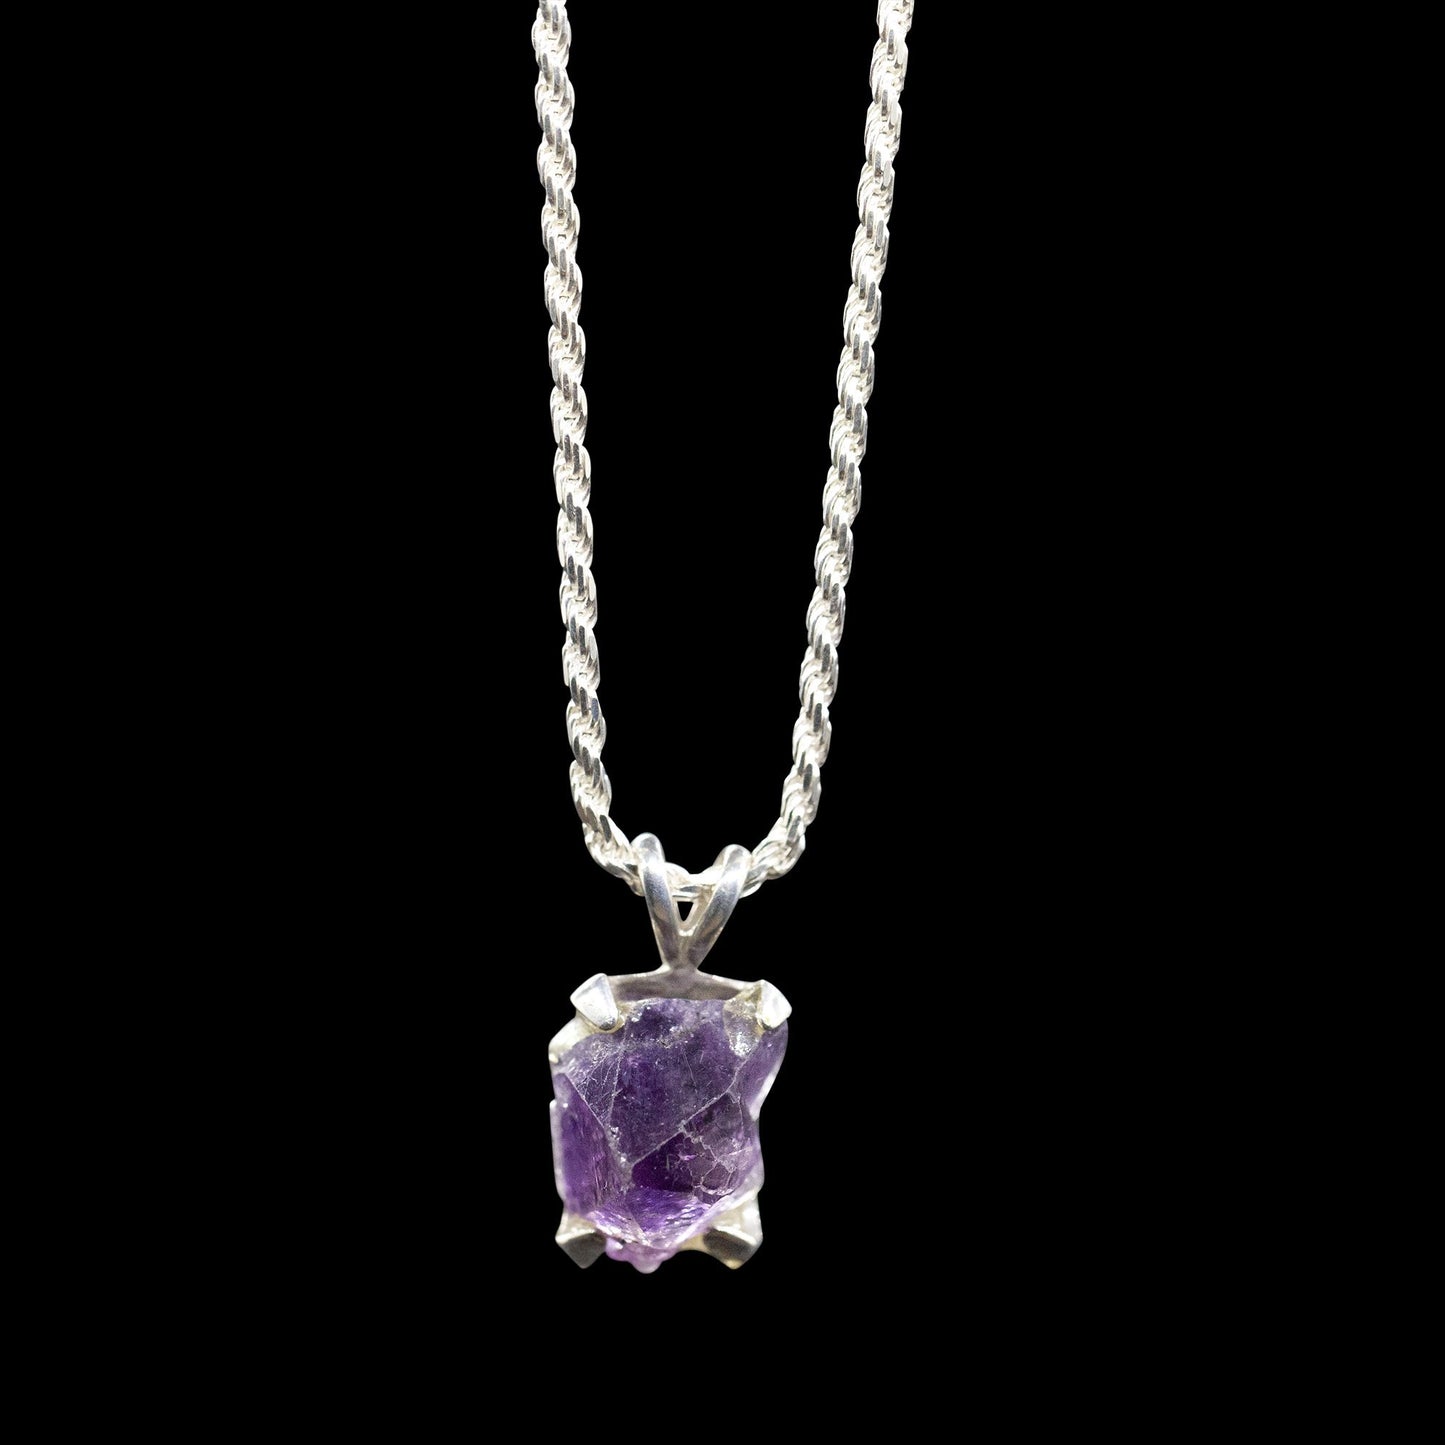 Raw Amethyst Nugget on Sterling Silver Rope